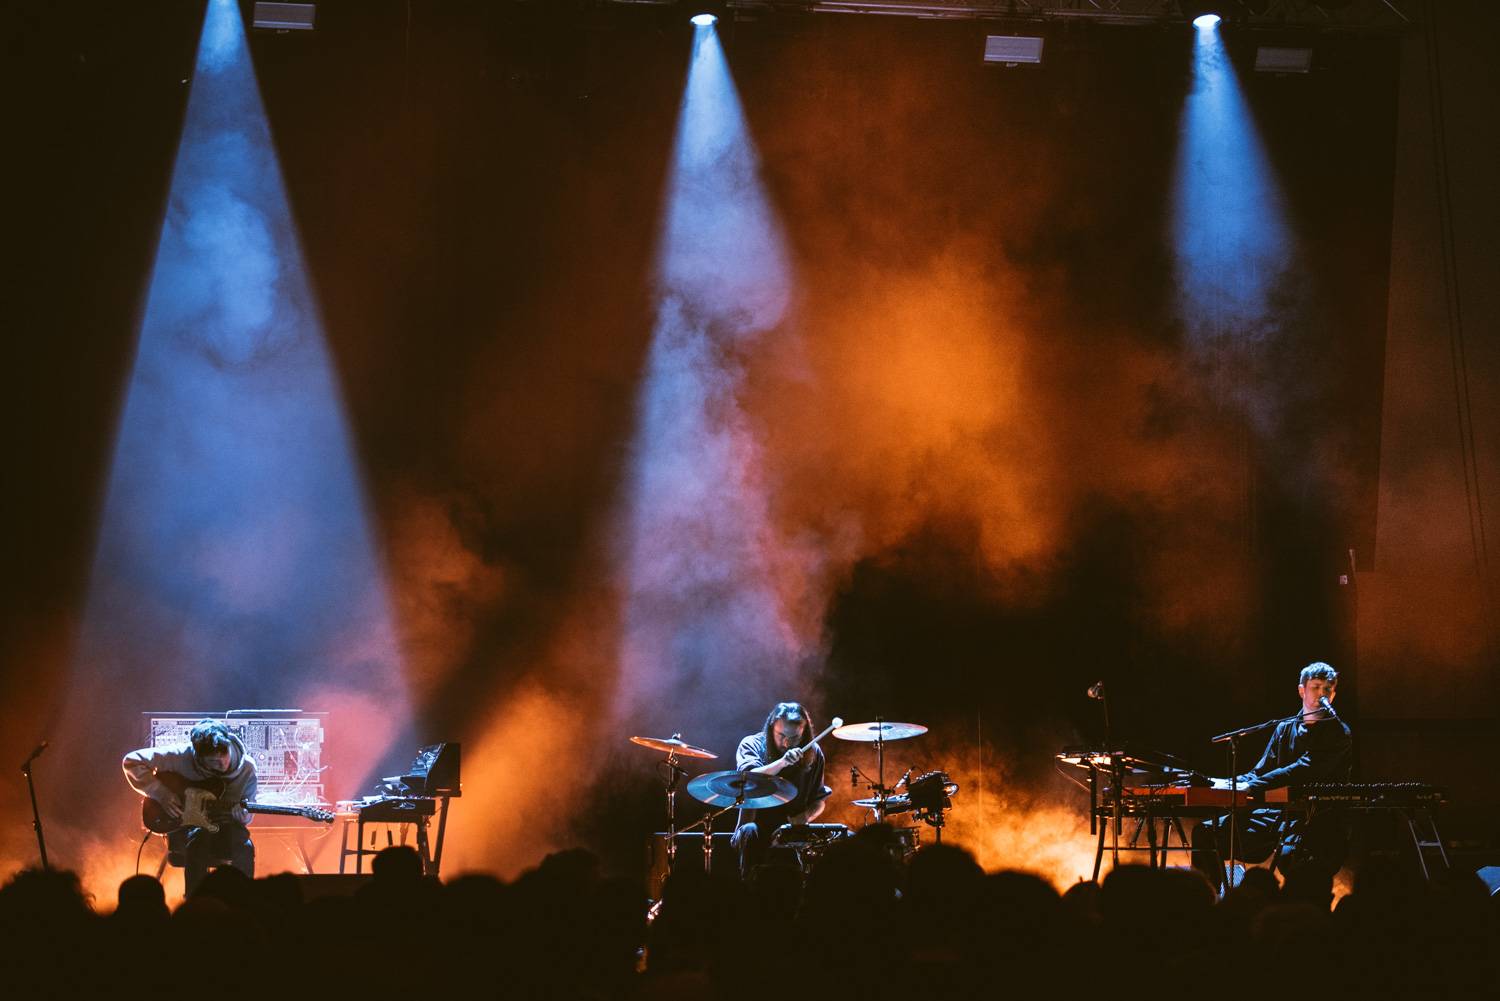 James Blake at the Harbour Convention Center, Vancouver, Mar 23 2019. Pavel Boiko photo.